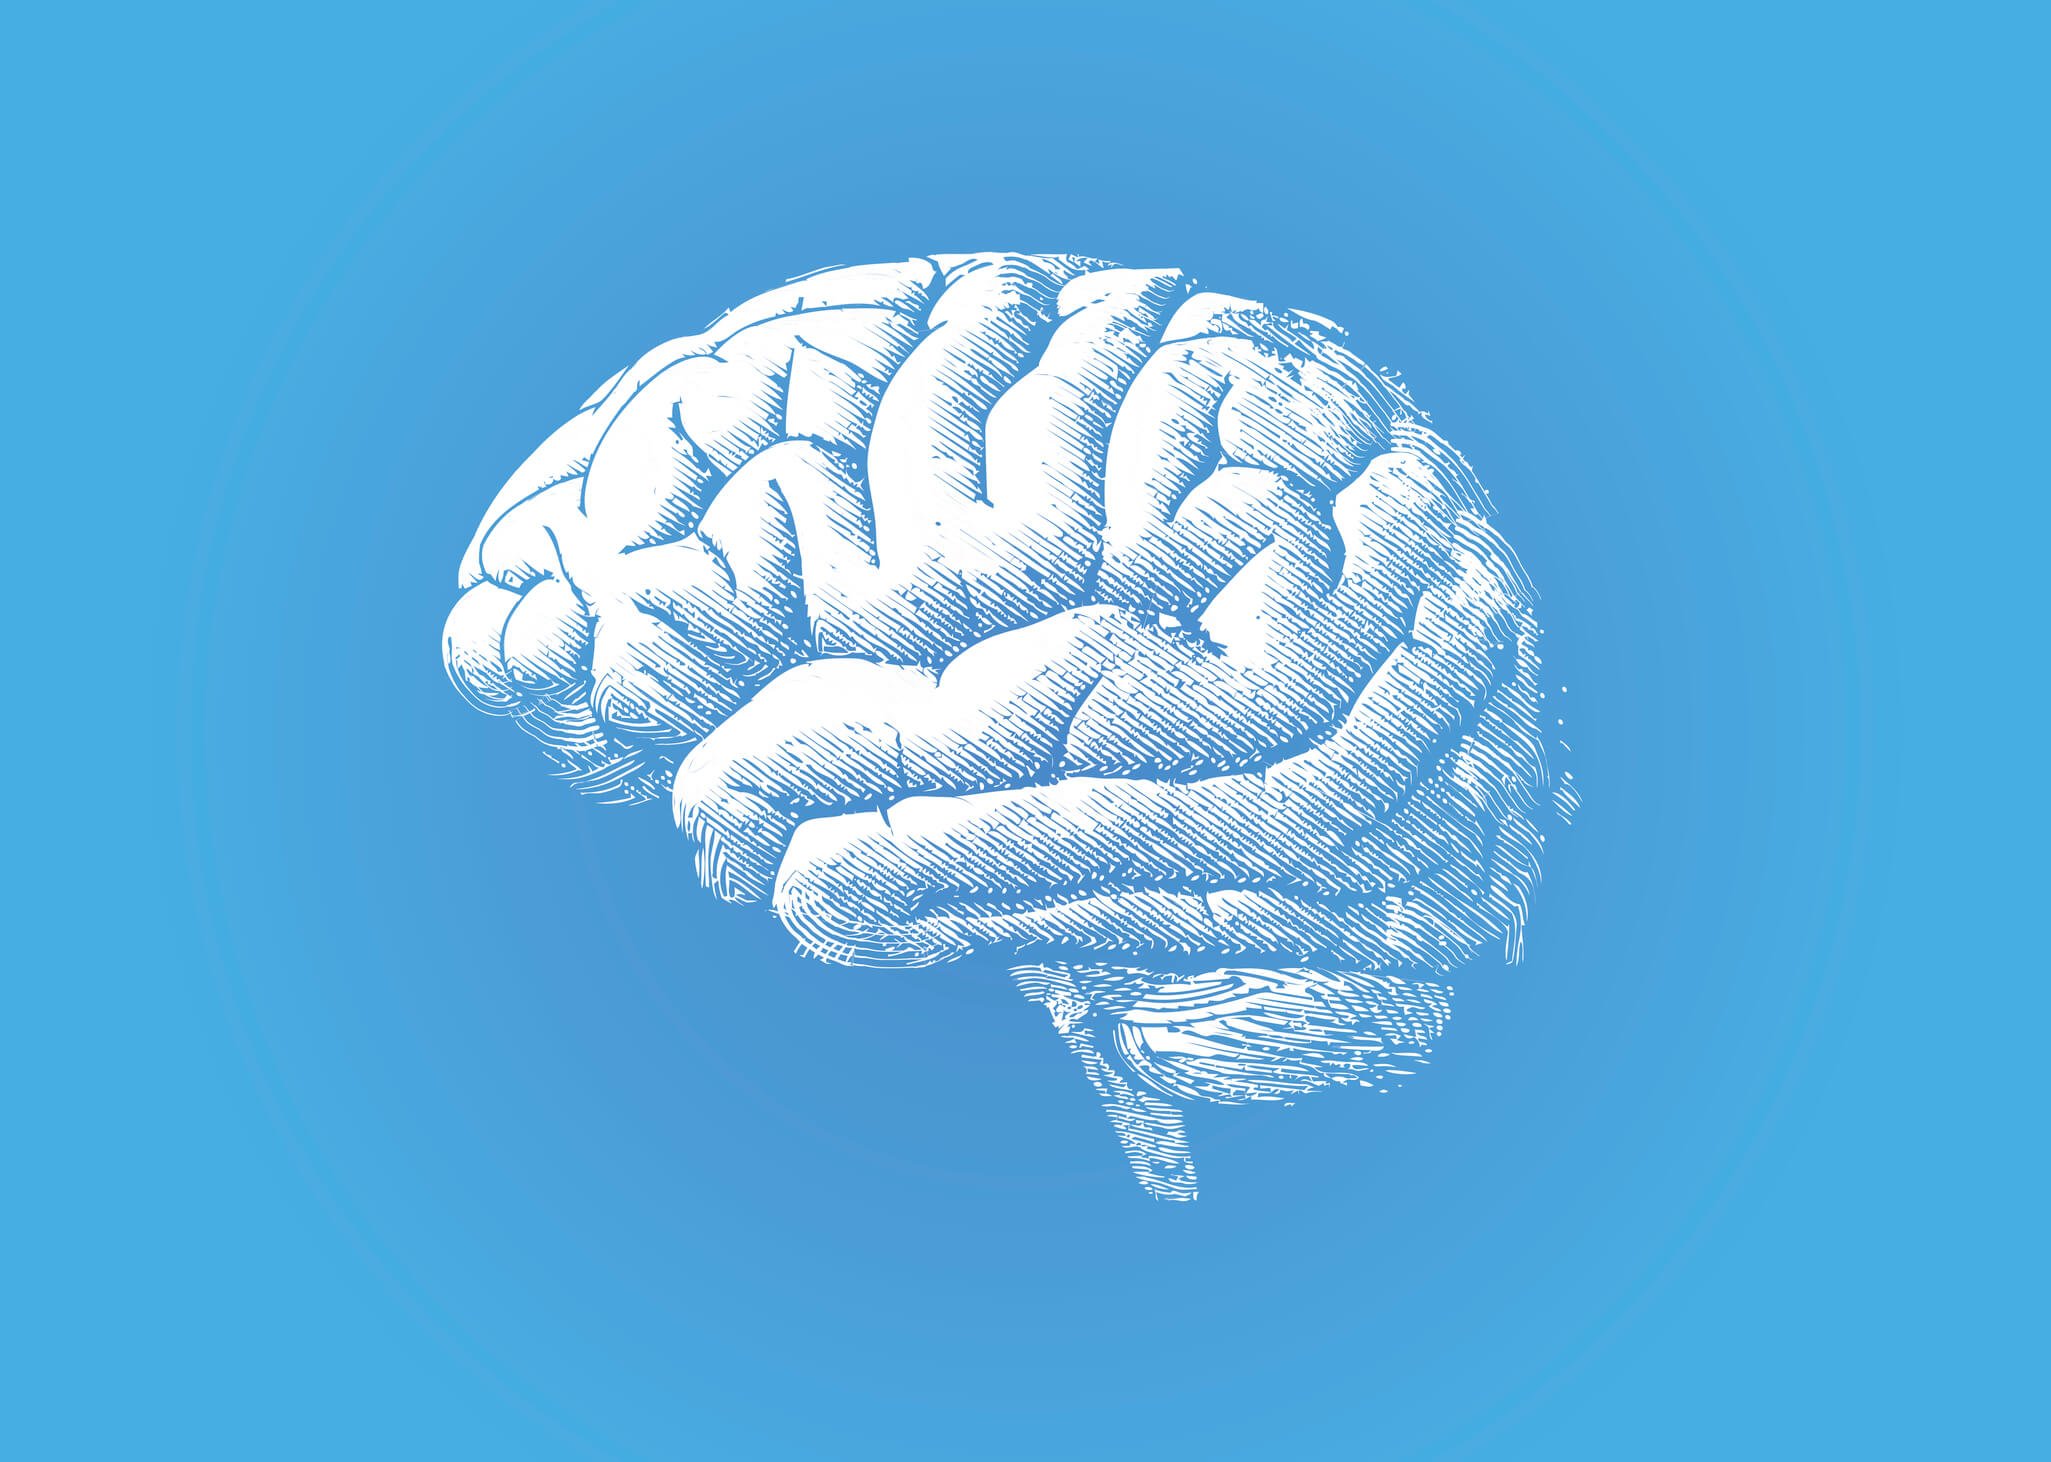 Drawing of a brain on a blue background